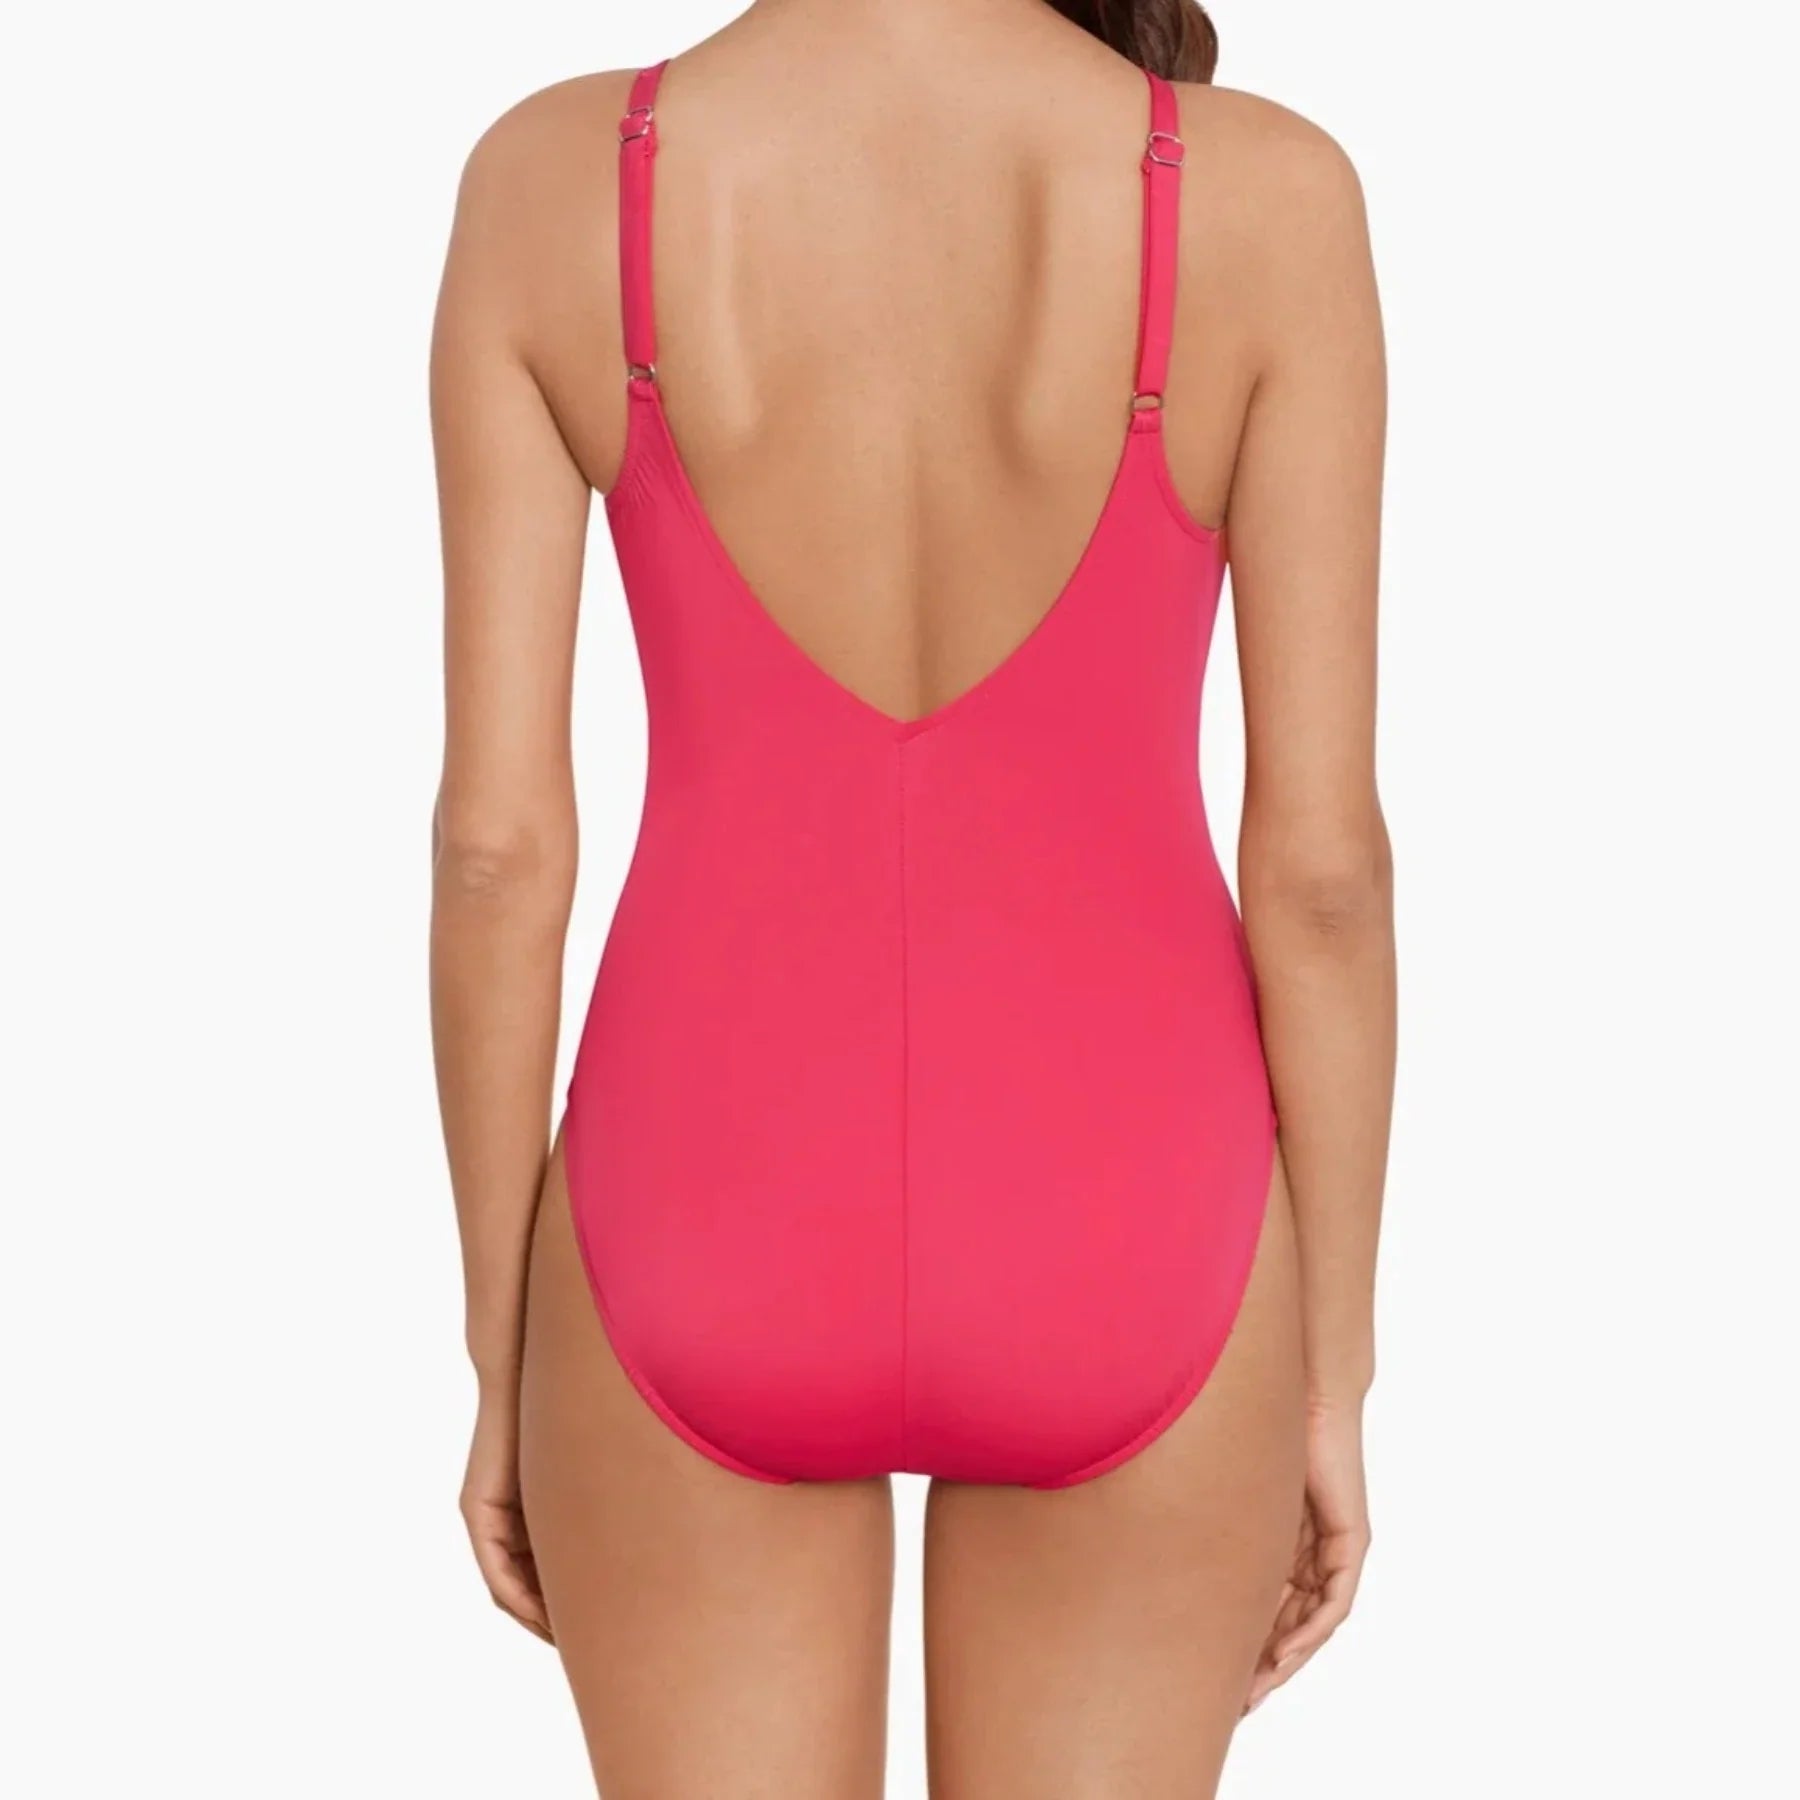 Riveted Diana One Piece Swimsuit 6017510 - Coral Rose